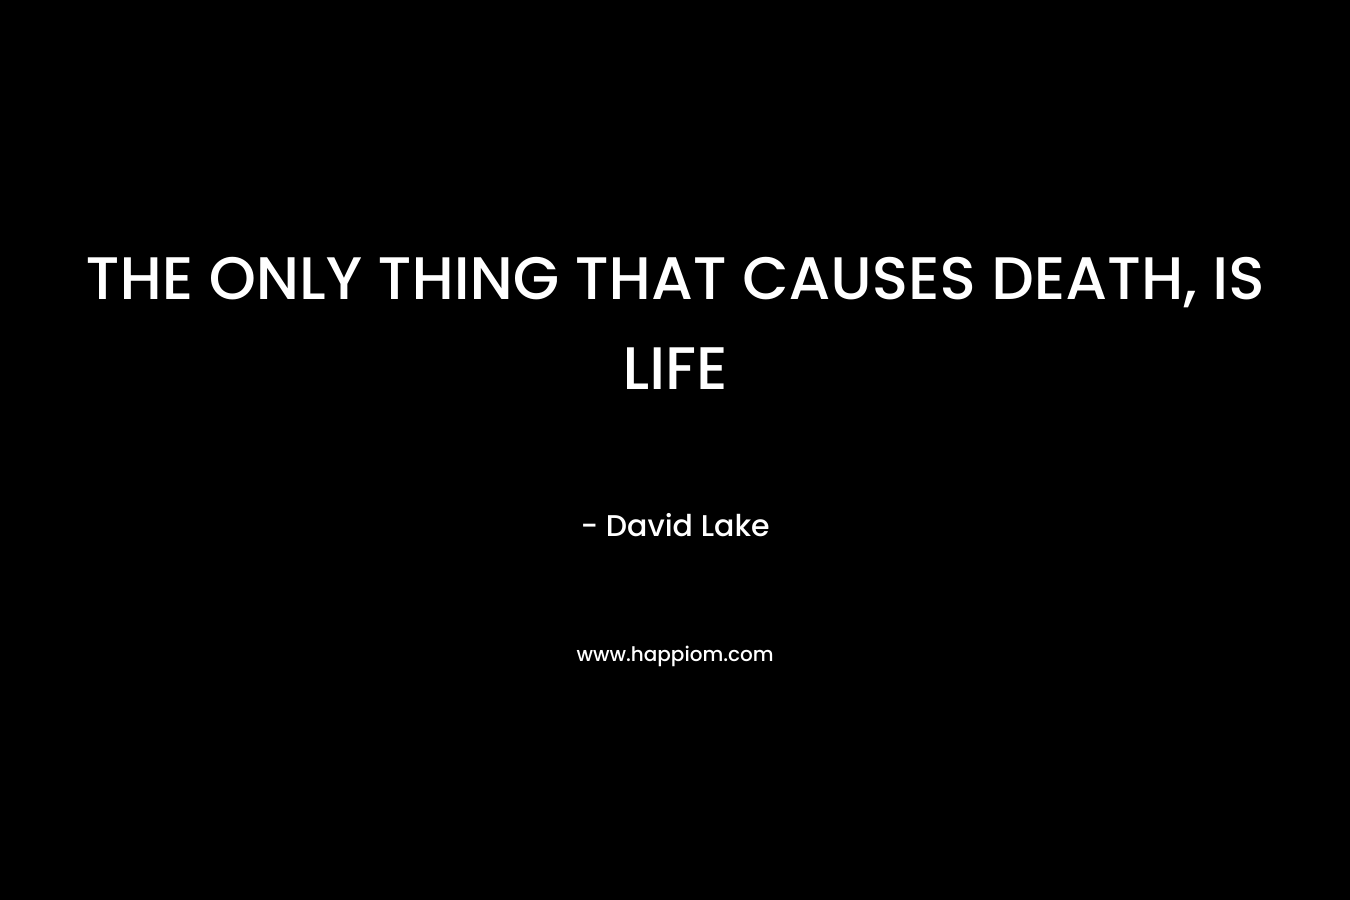 THE ONLY THING THAT CAUSES DEATH, IS LIFE